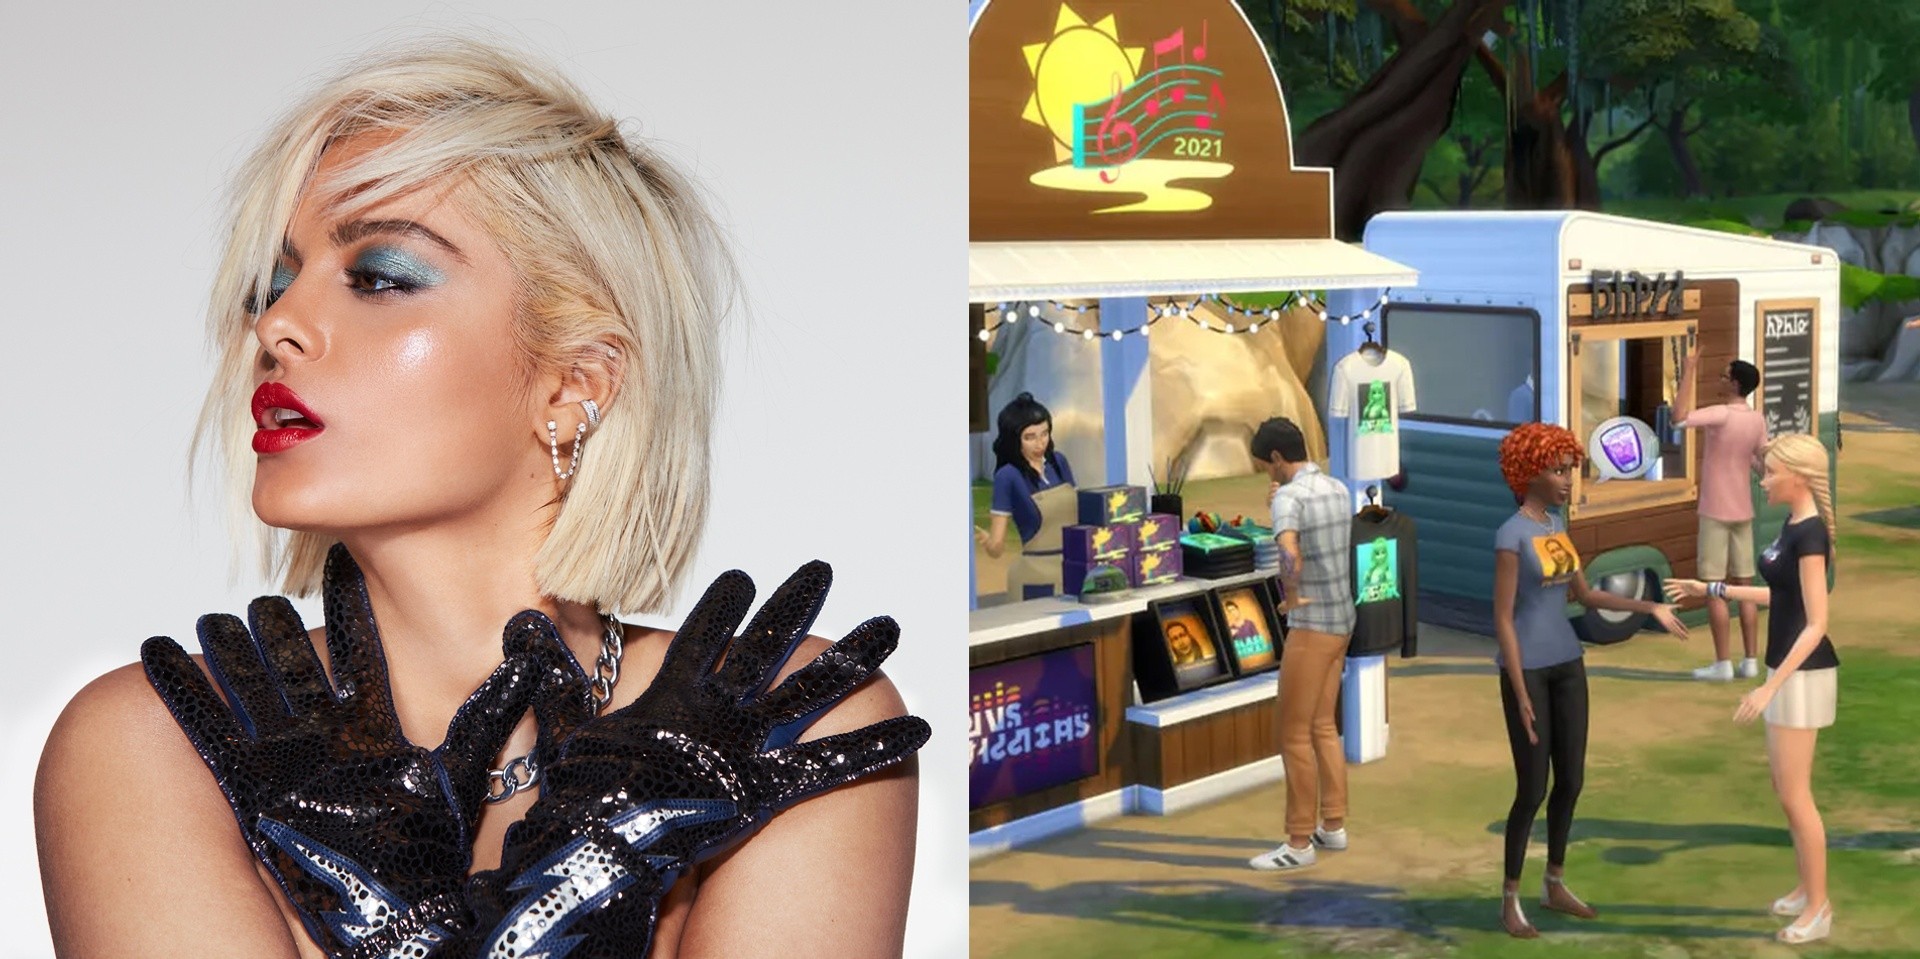 The Sims to launch its first in-game music festival 'Sims Sessions' with Bebe Rexha, Glass Animals, and Joy Oladokun